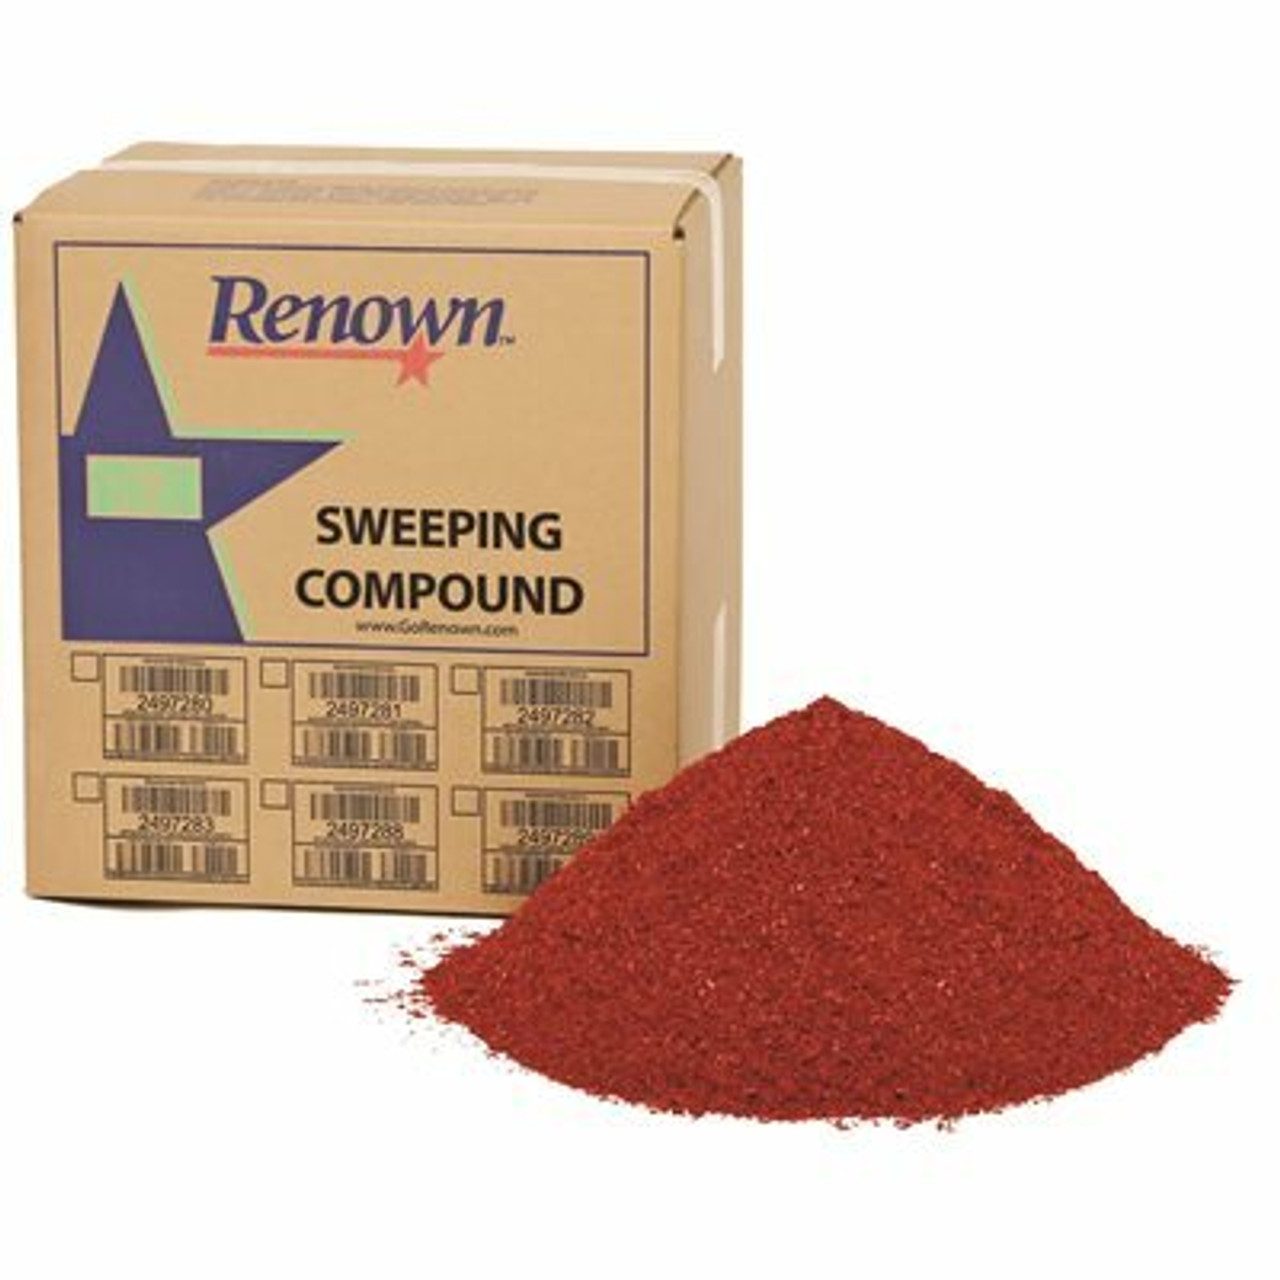 Renown Sweeping Compound Oil Base, With Grit, 50 Lb. Box, Red